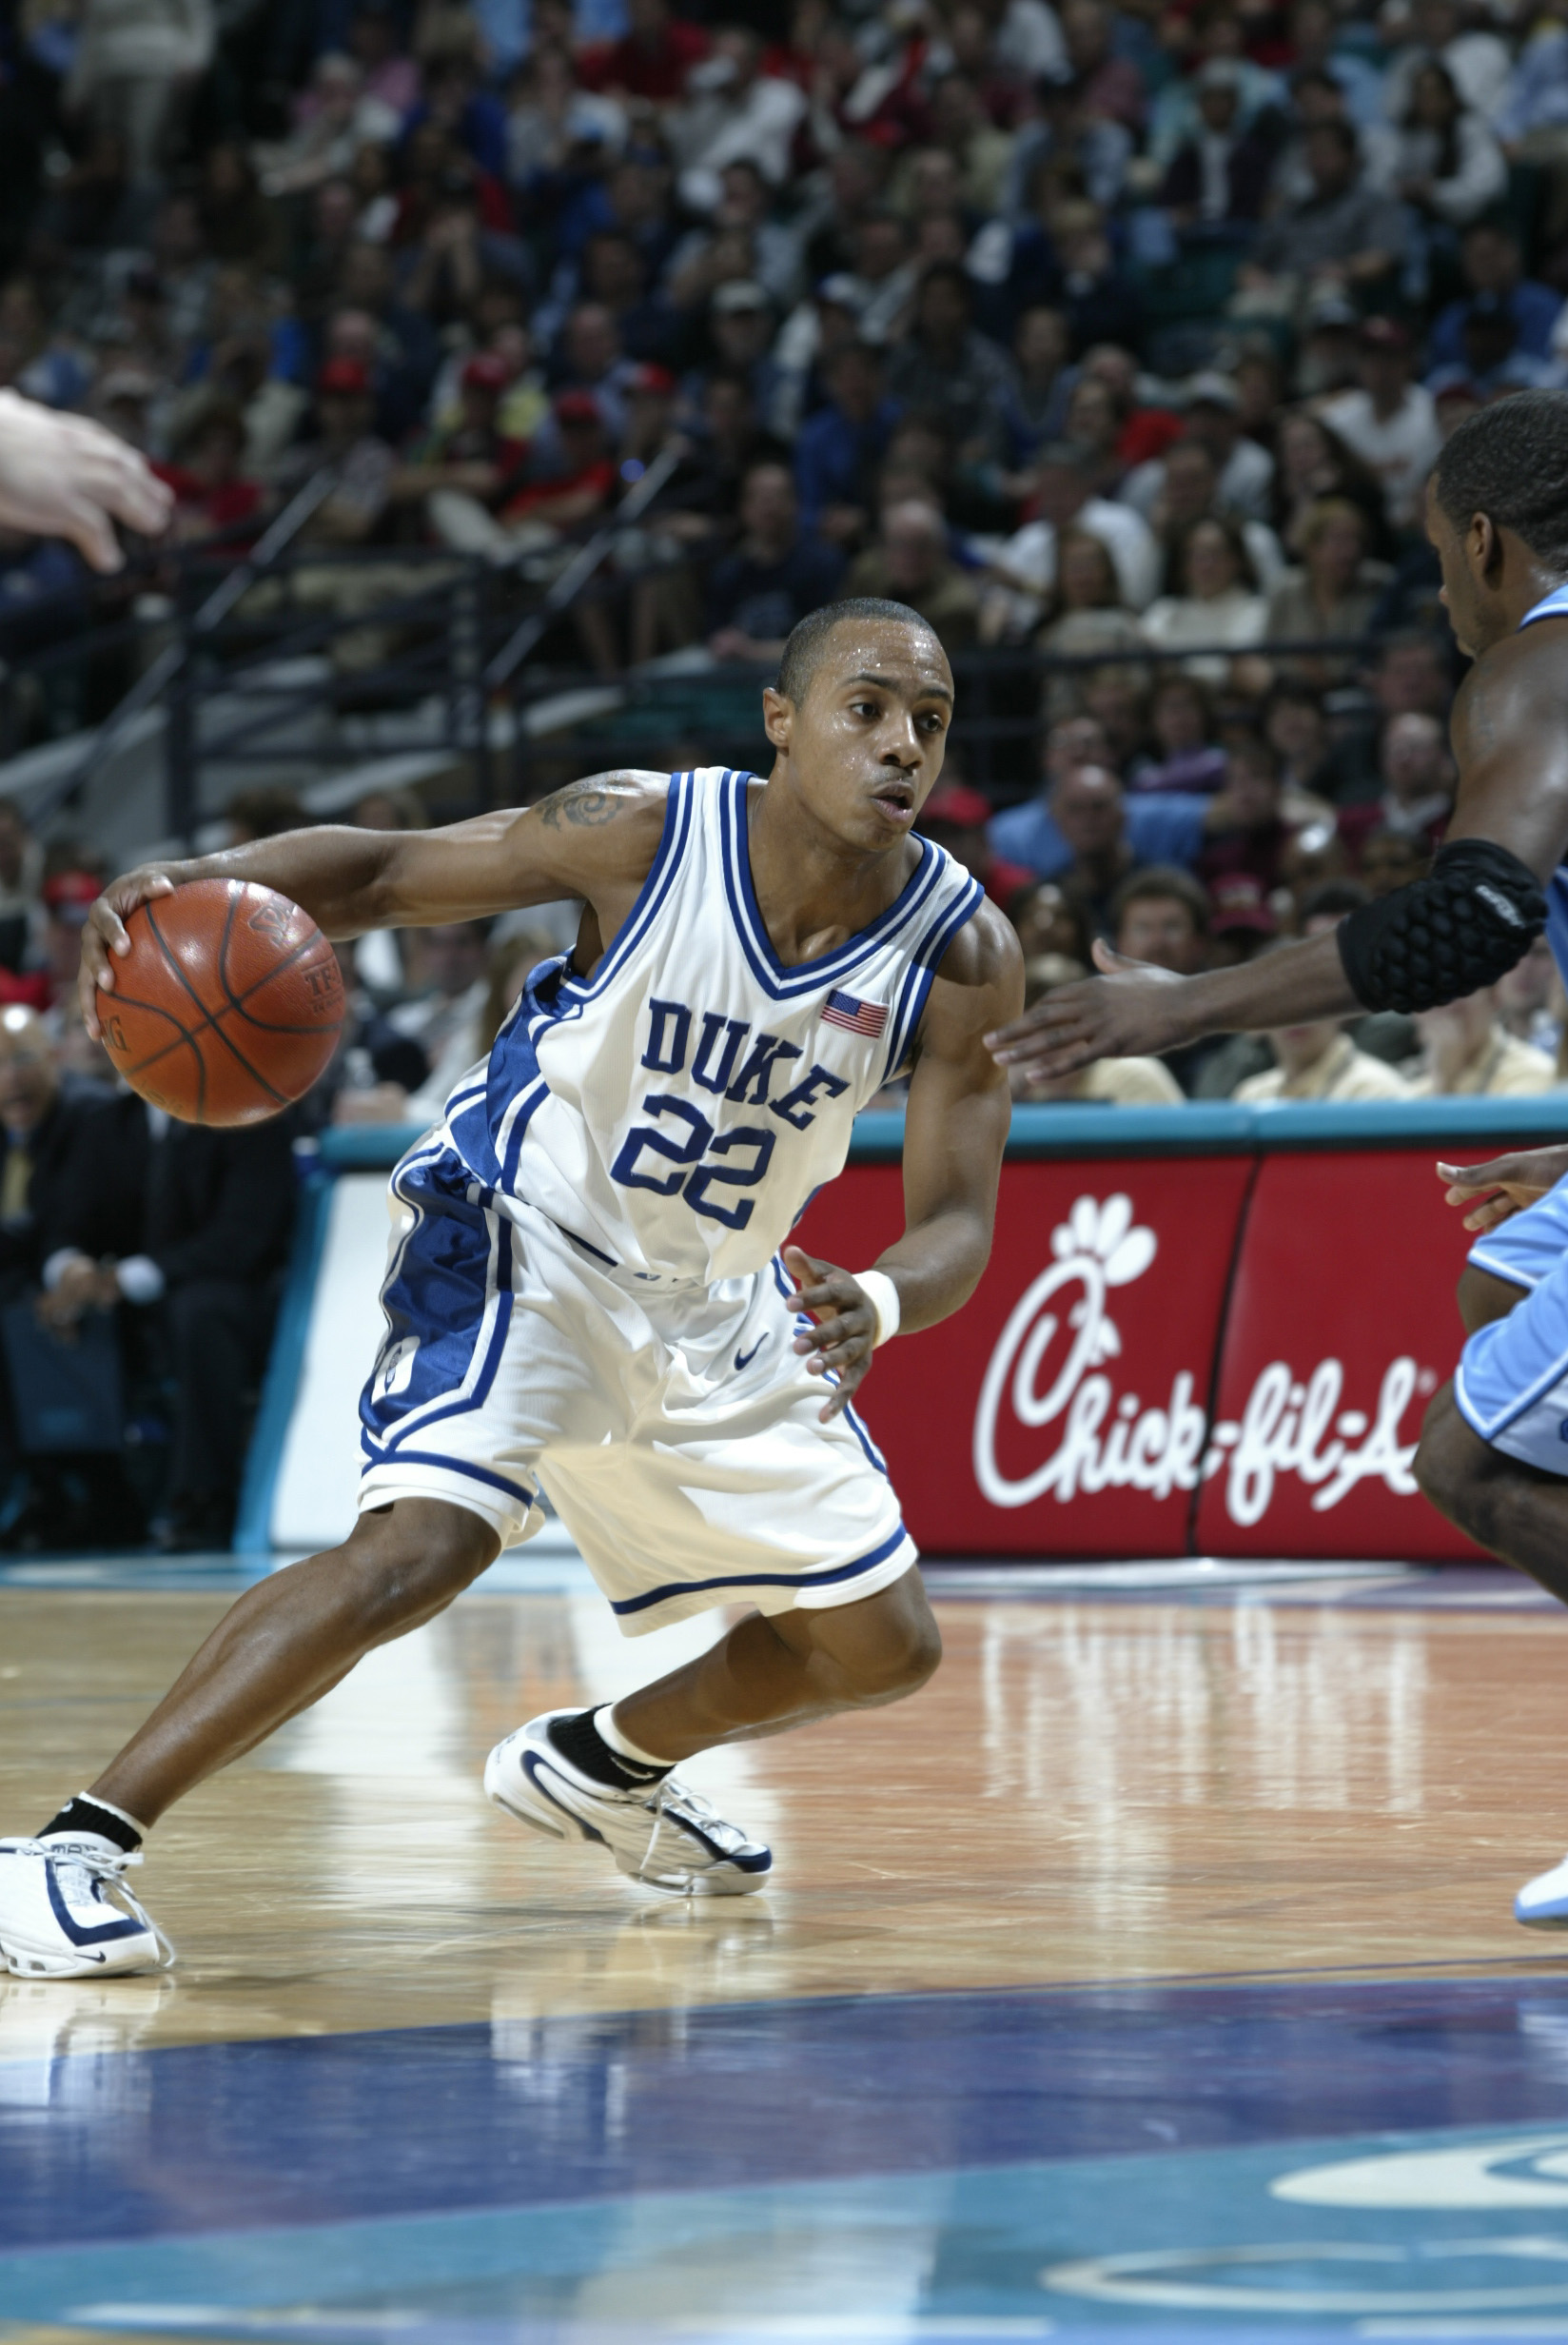 PHOTO: Jason Williams of Duke moves against the defense of North Carolina during the ACC Tournament game at the Charlotte Coliseum in Charlotte, North Carolina.